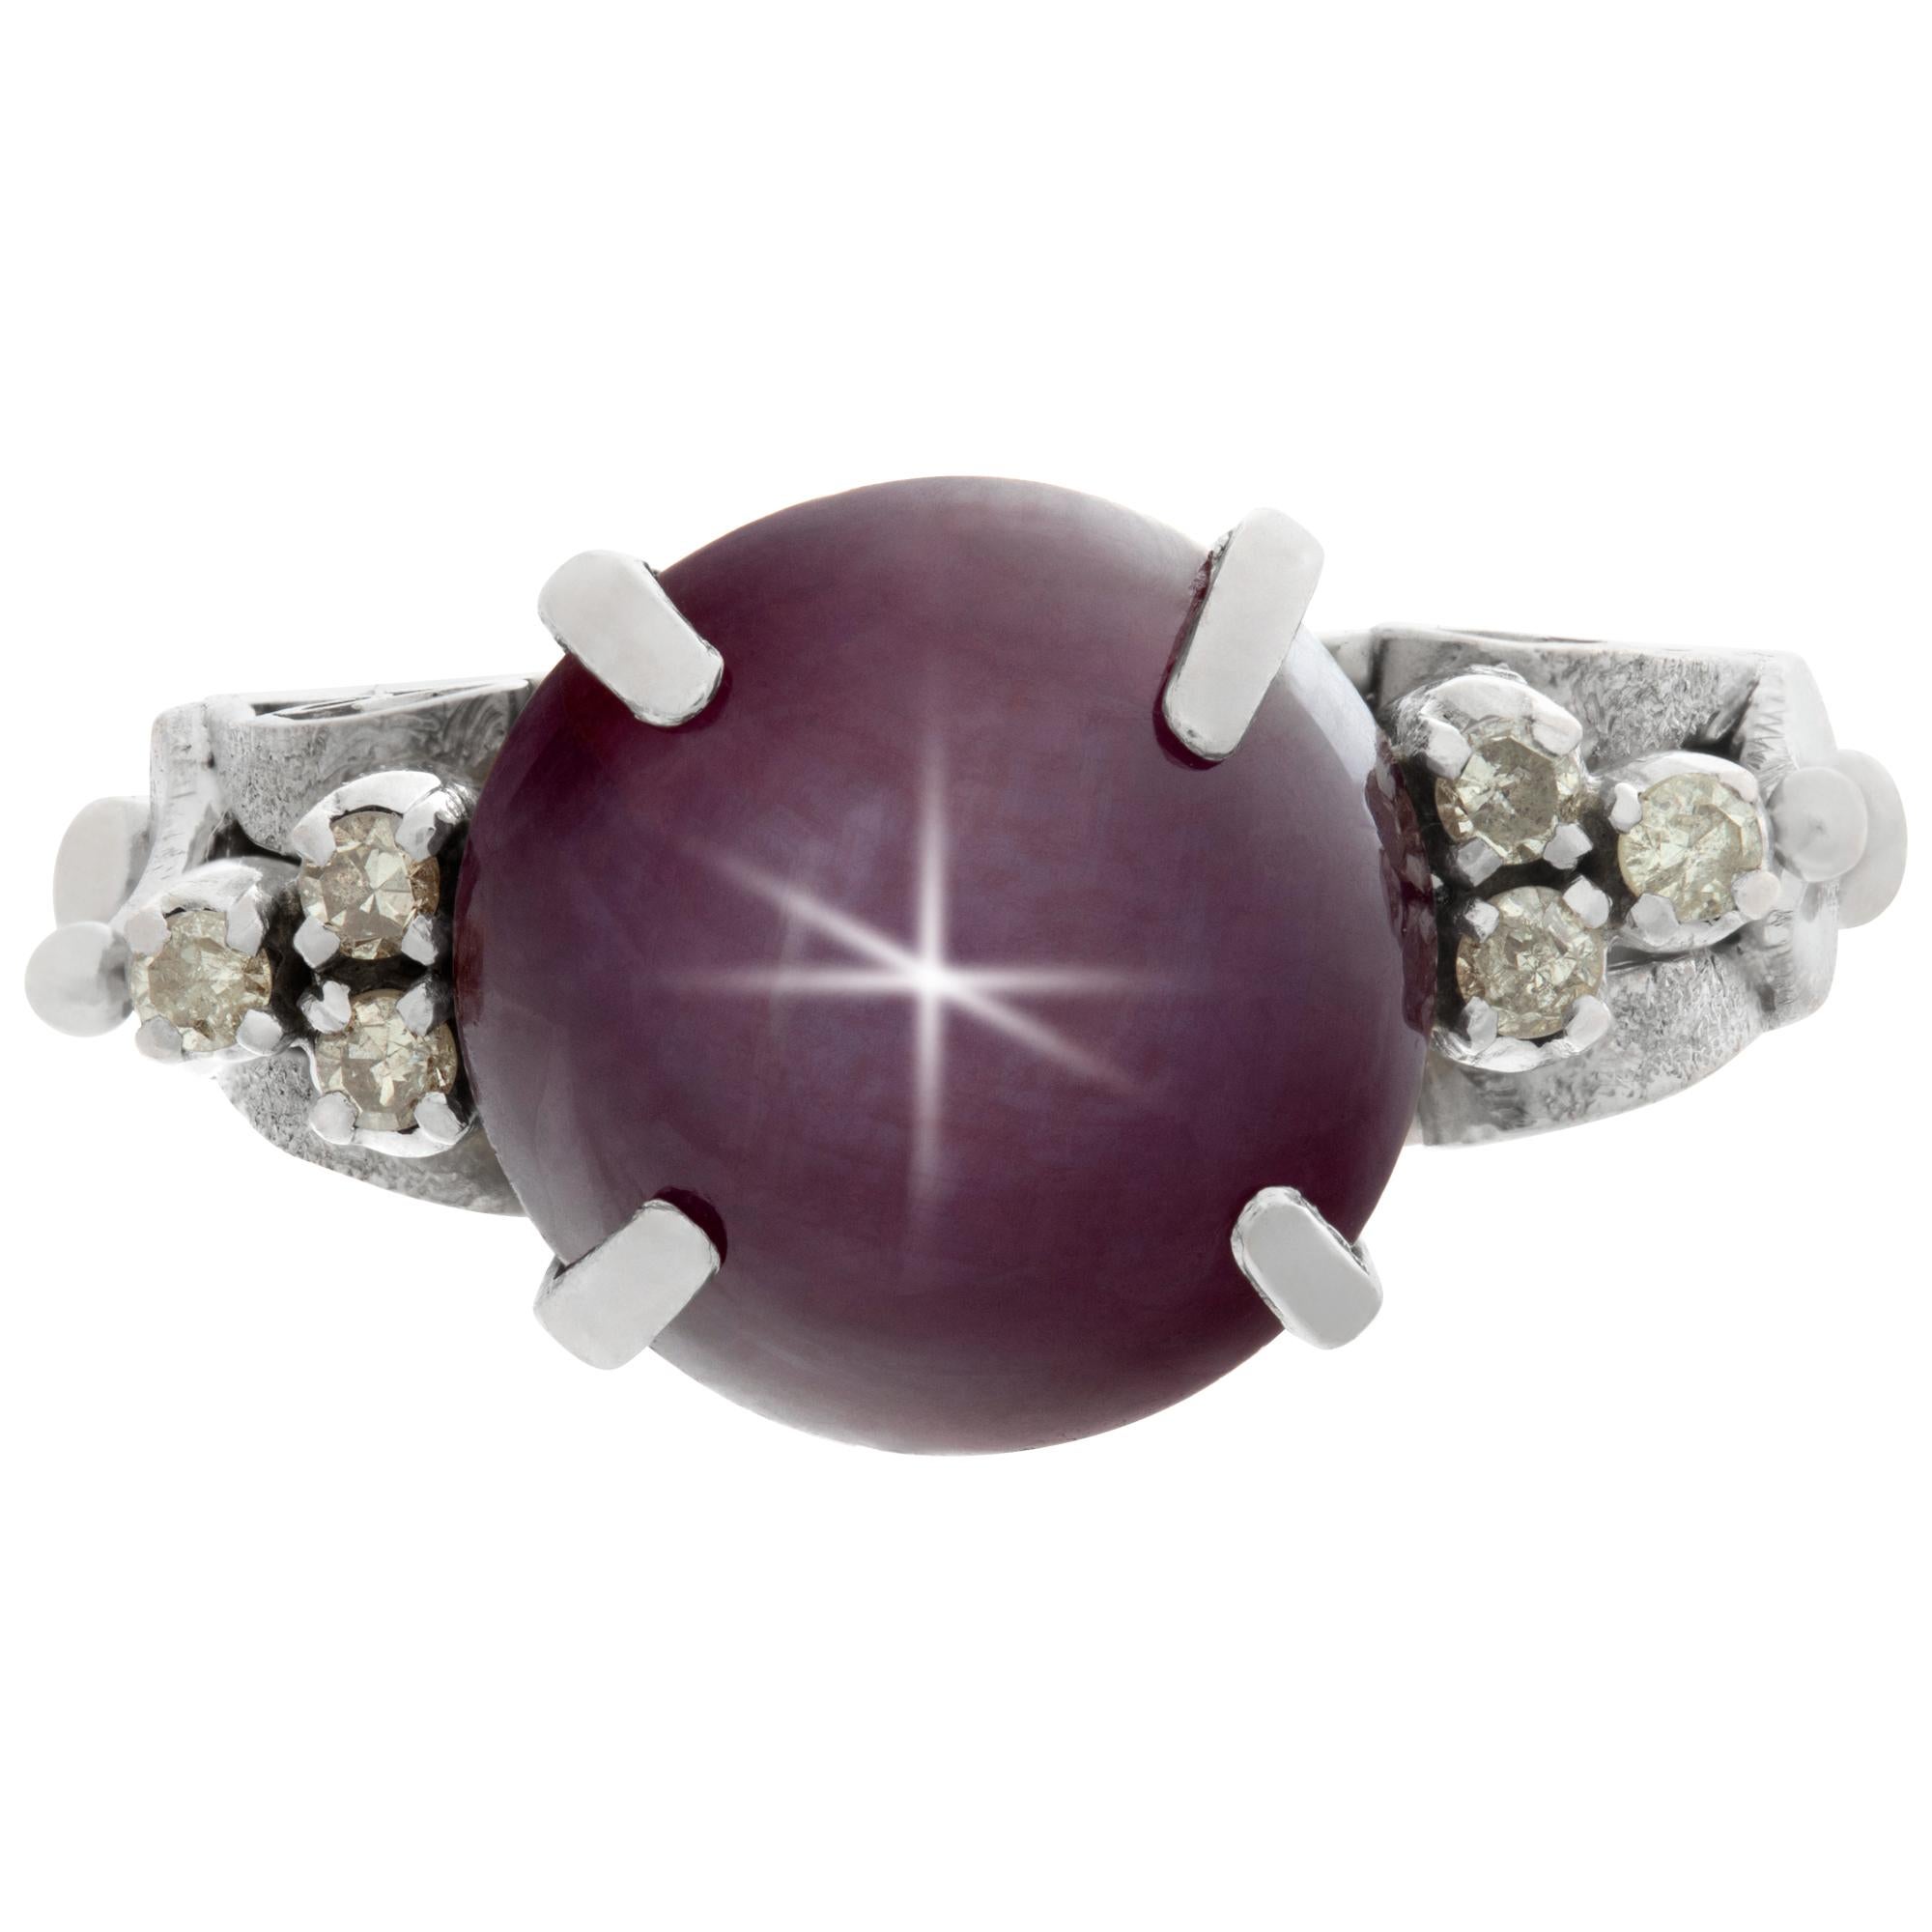 Vintage ruby star sapphire ring in 14k white gold with diamond accents, approximate 4 carat star ruby. Size 5.5, head 11mm x 19mm, shank 3mm.This Ruby ring is currently size 5.5 and some items can be sized up or down, please ask! It weighs 4.9